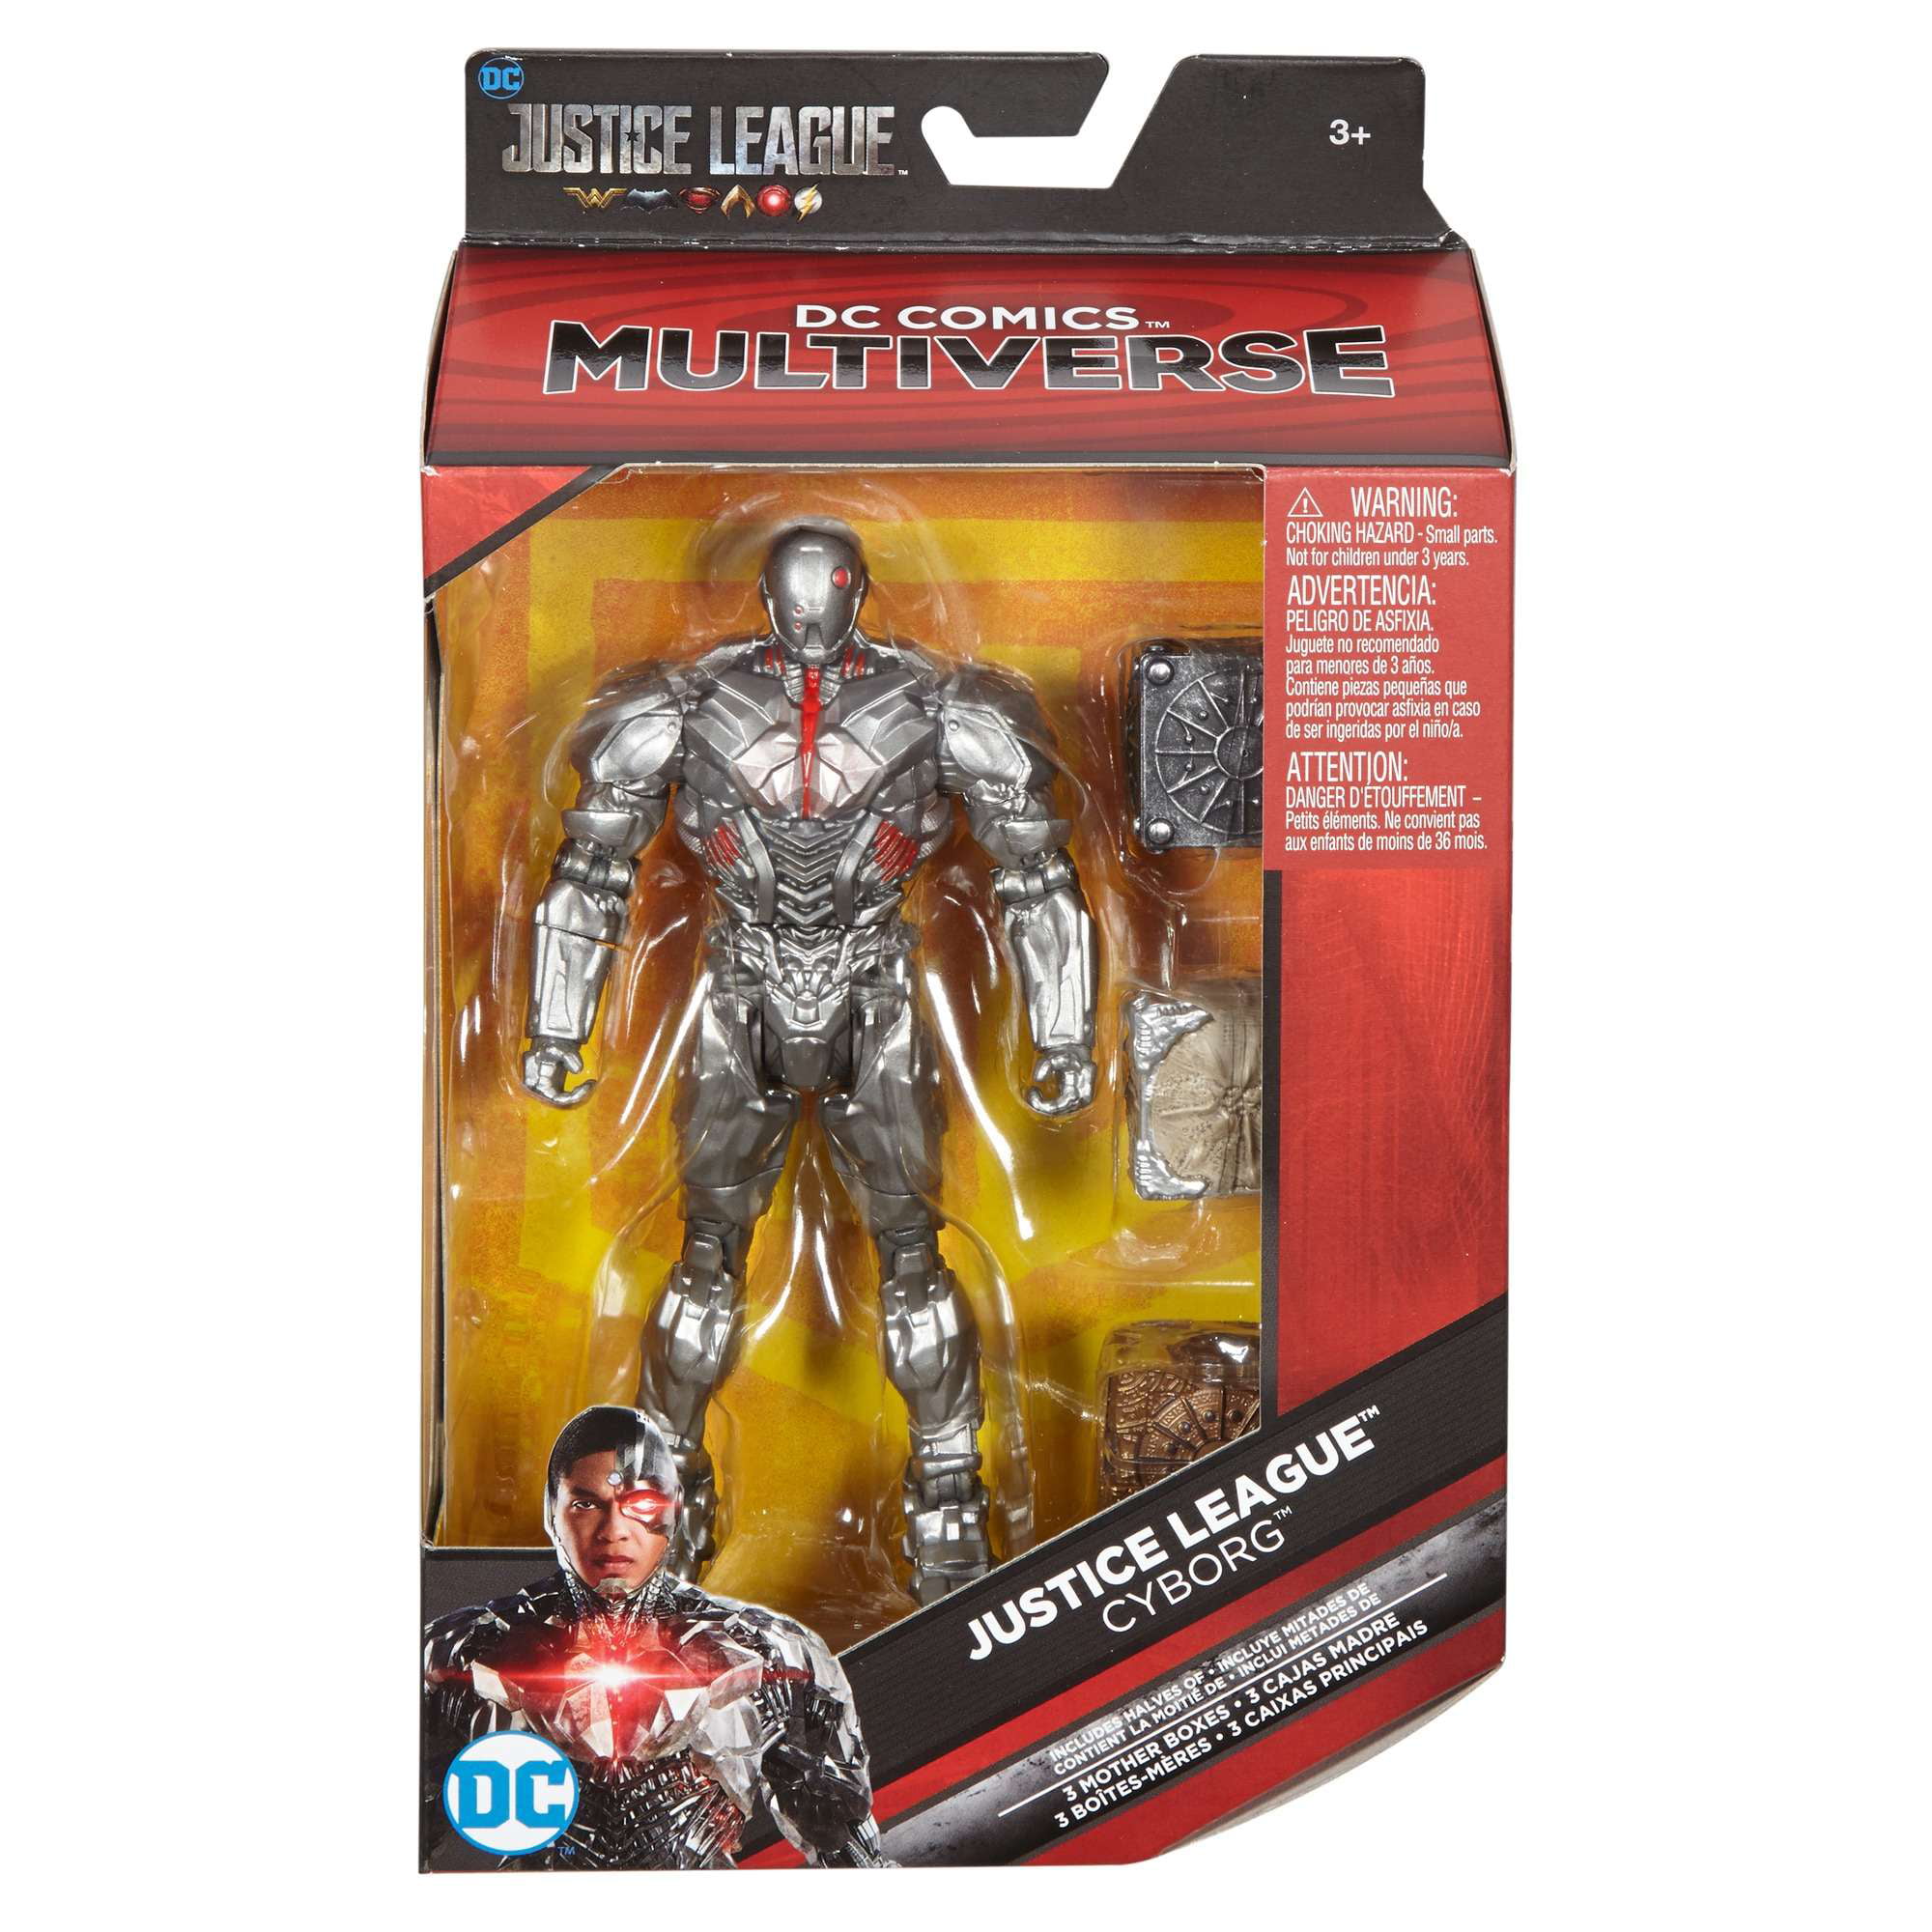 DC Multiverse Justice League Cyborg loose  Mint from 3 mother boxes 